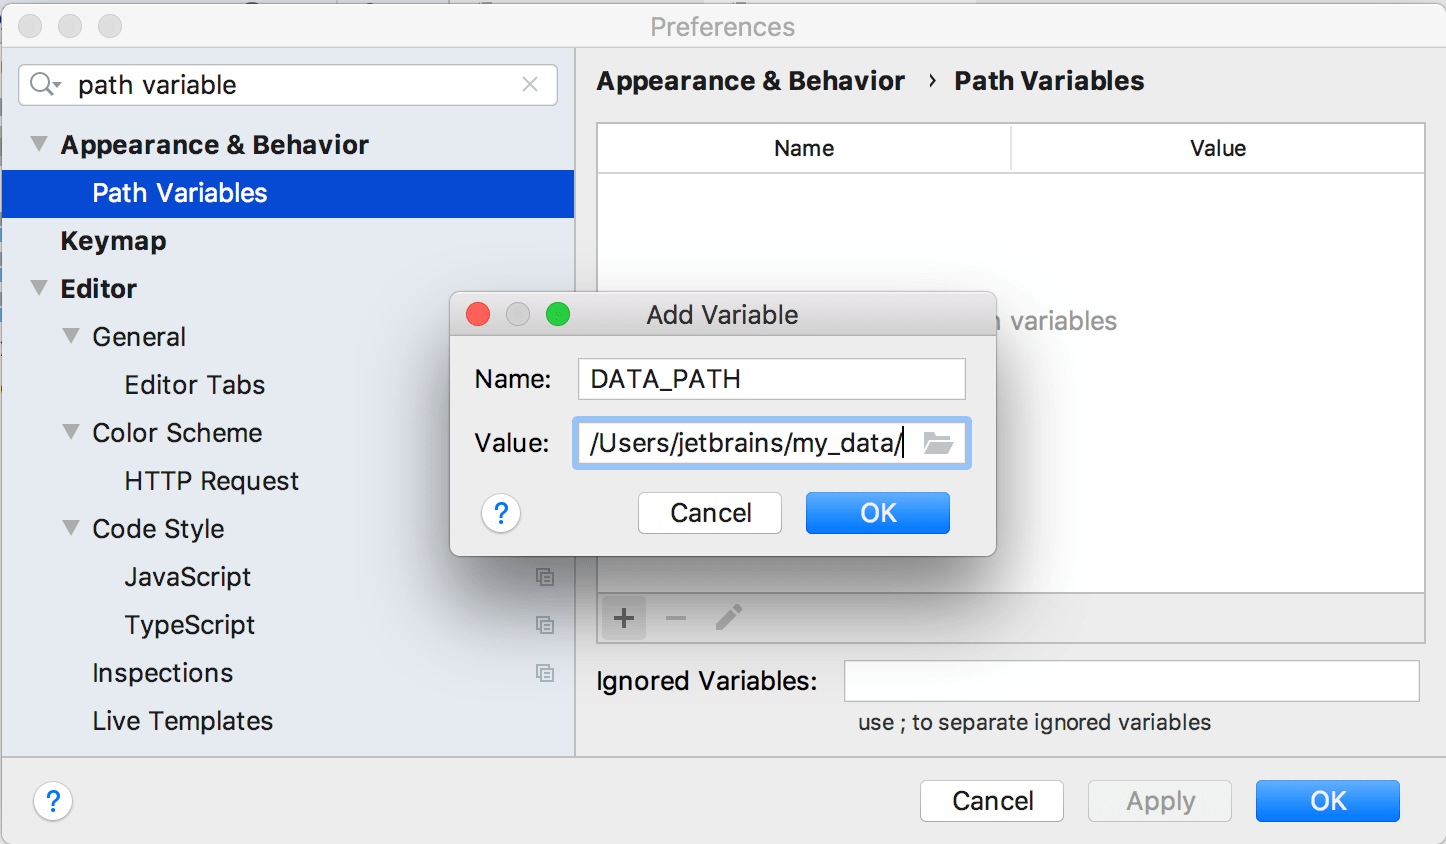 Adding a new path variable